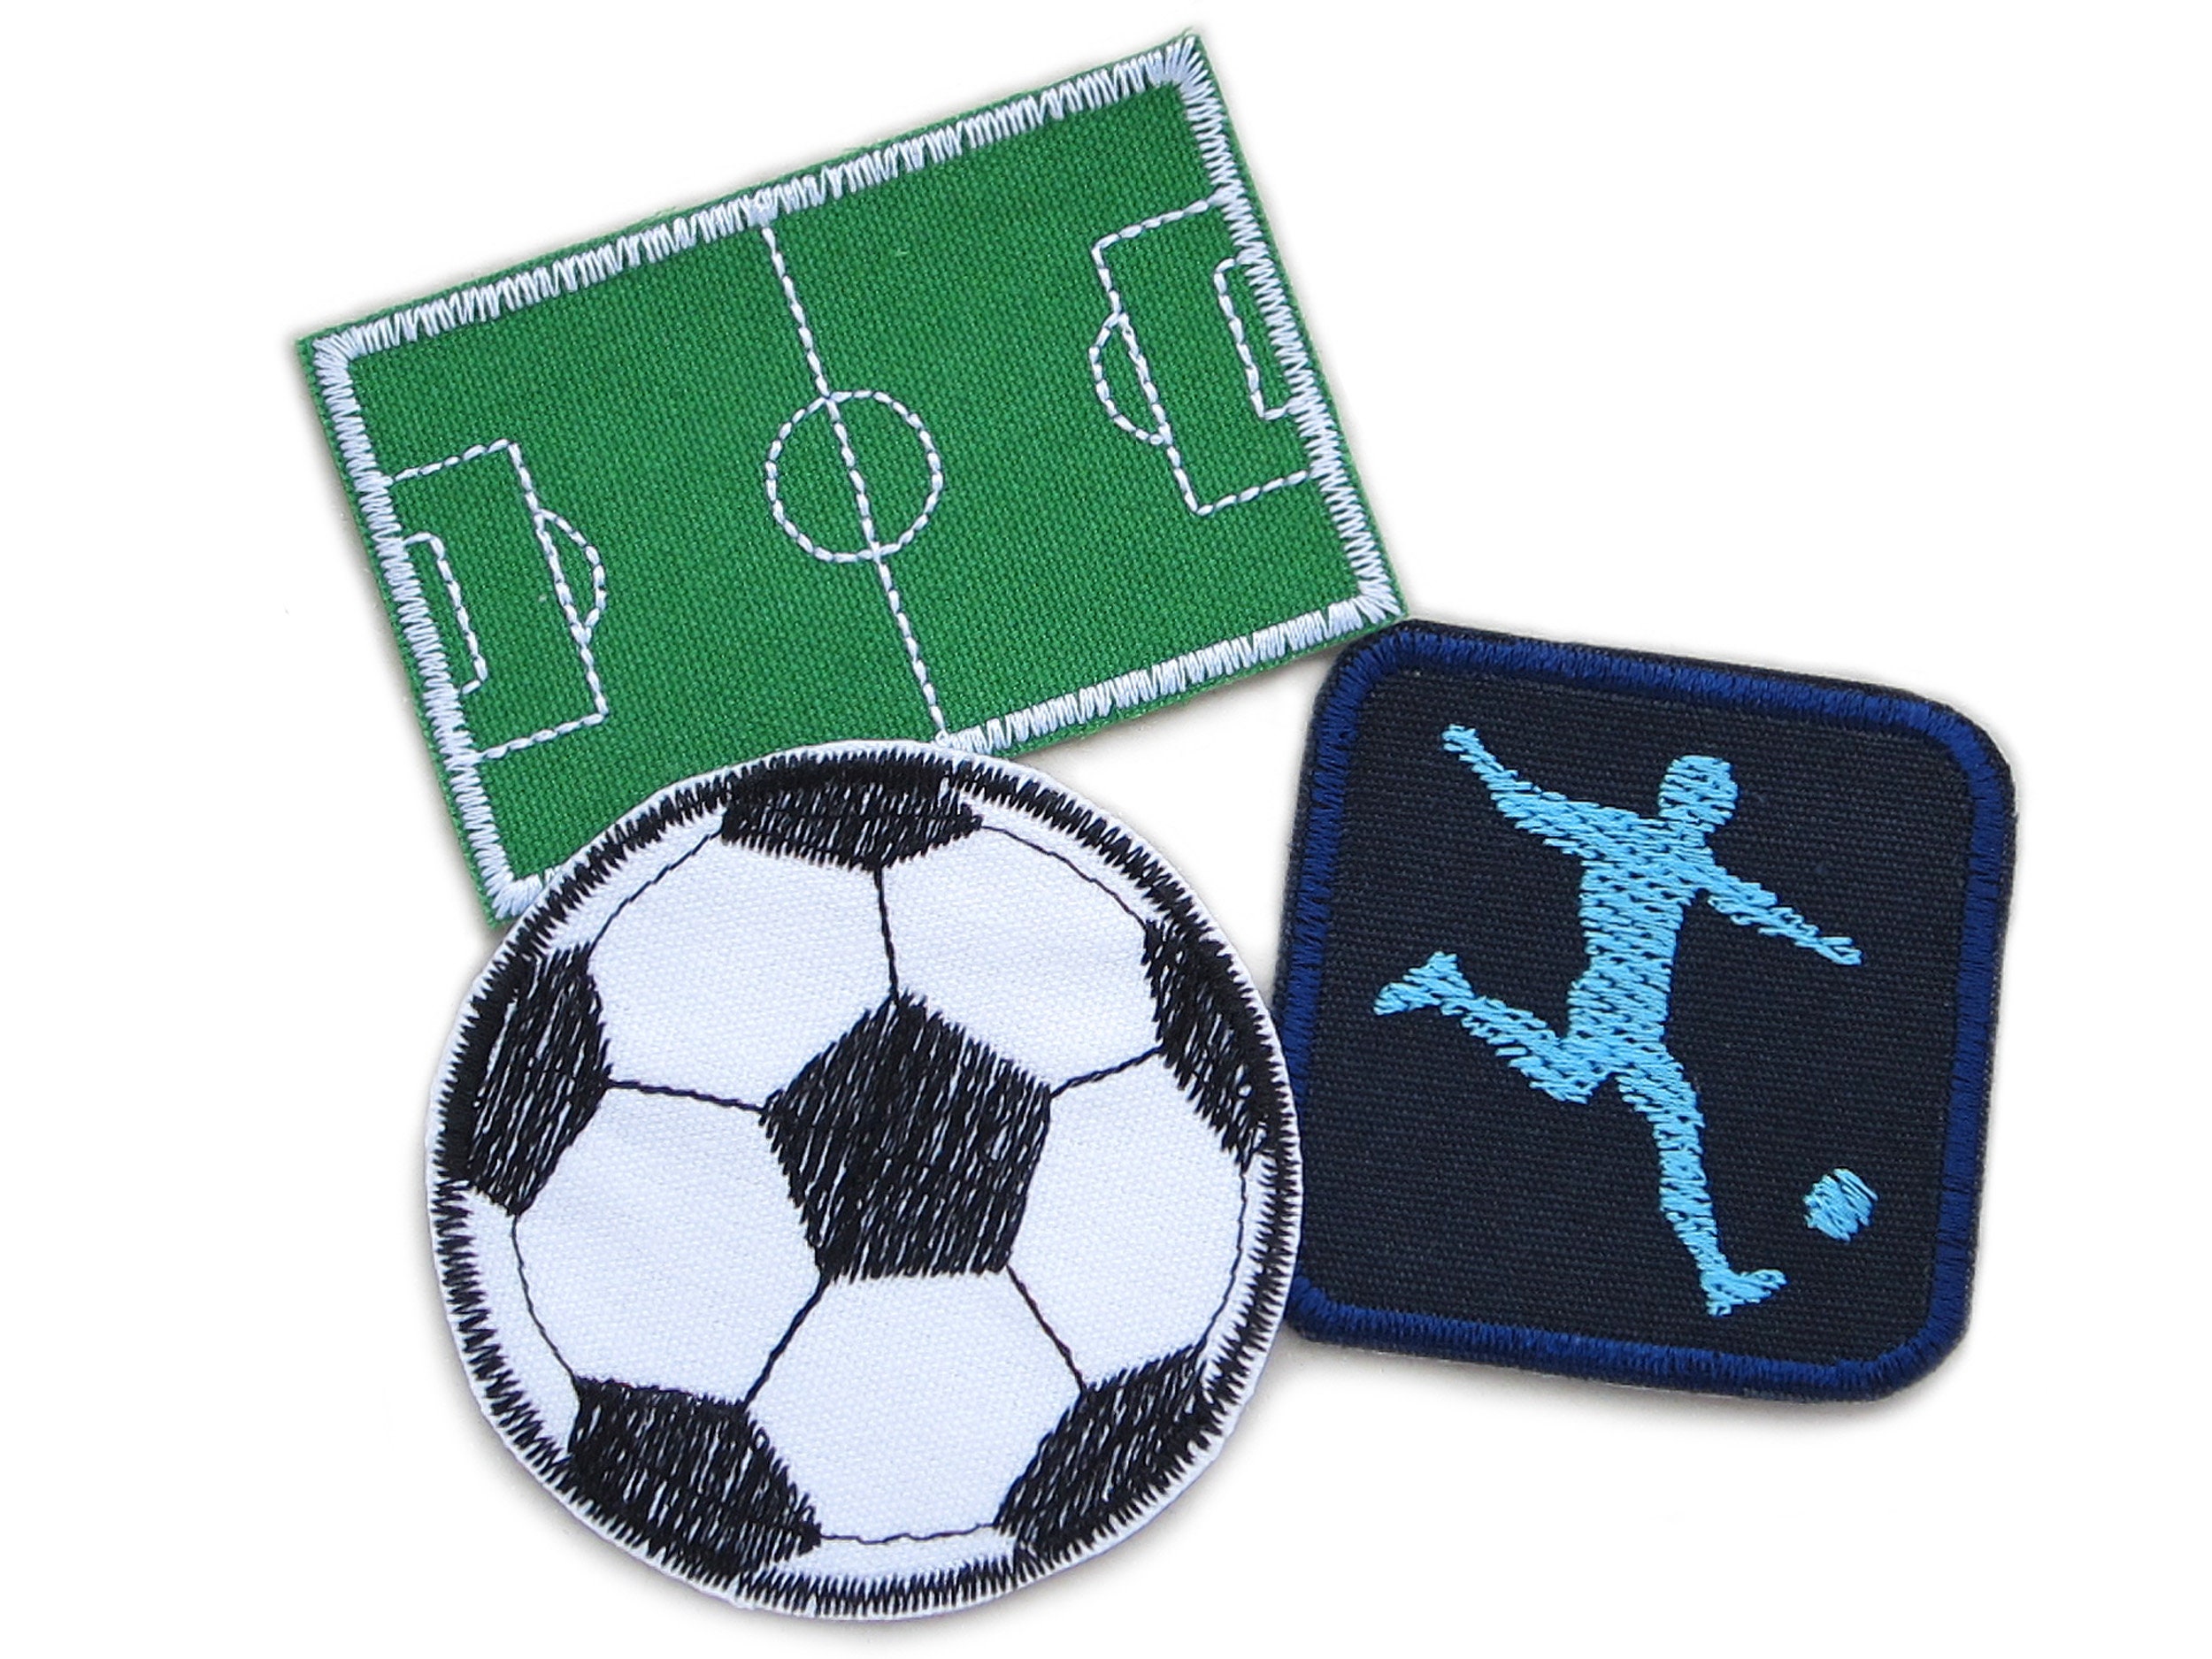 Set 3 Football Iron-on Patches, Football Patches Iron-on Transfers